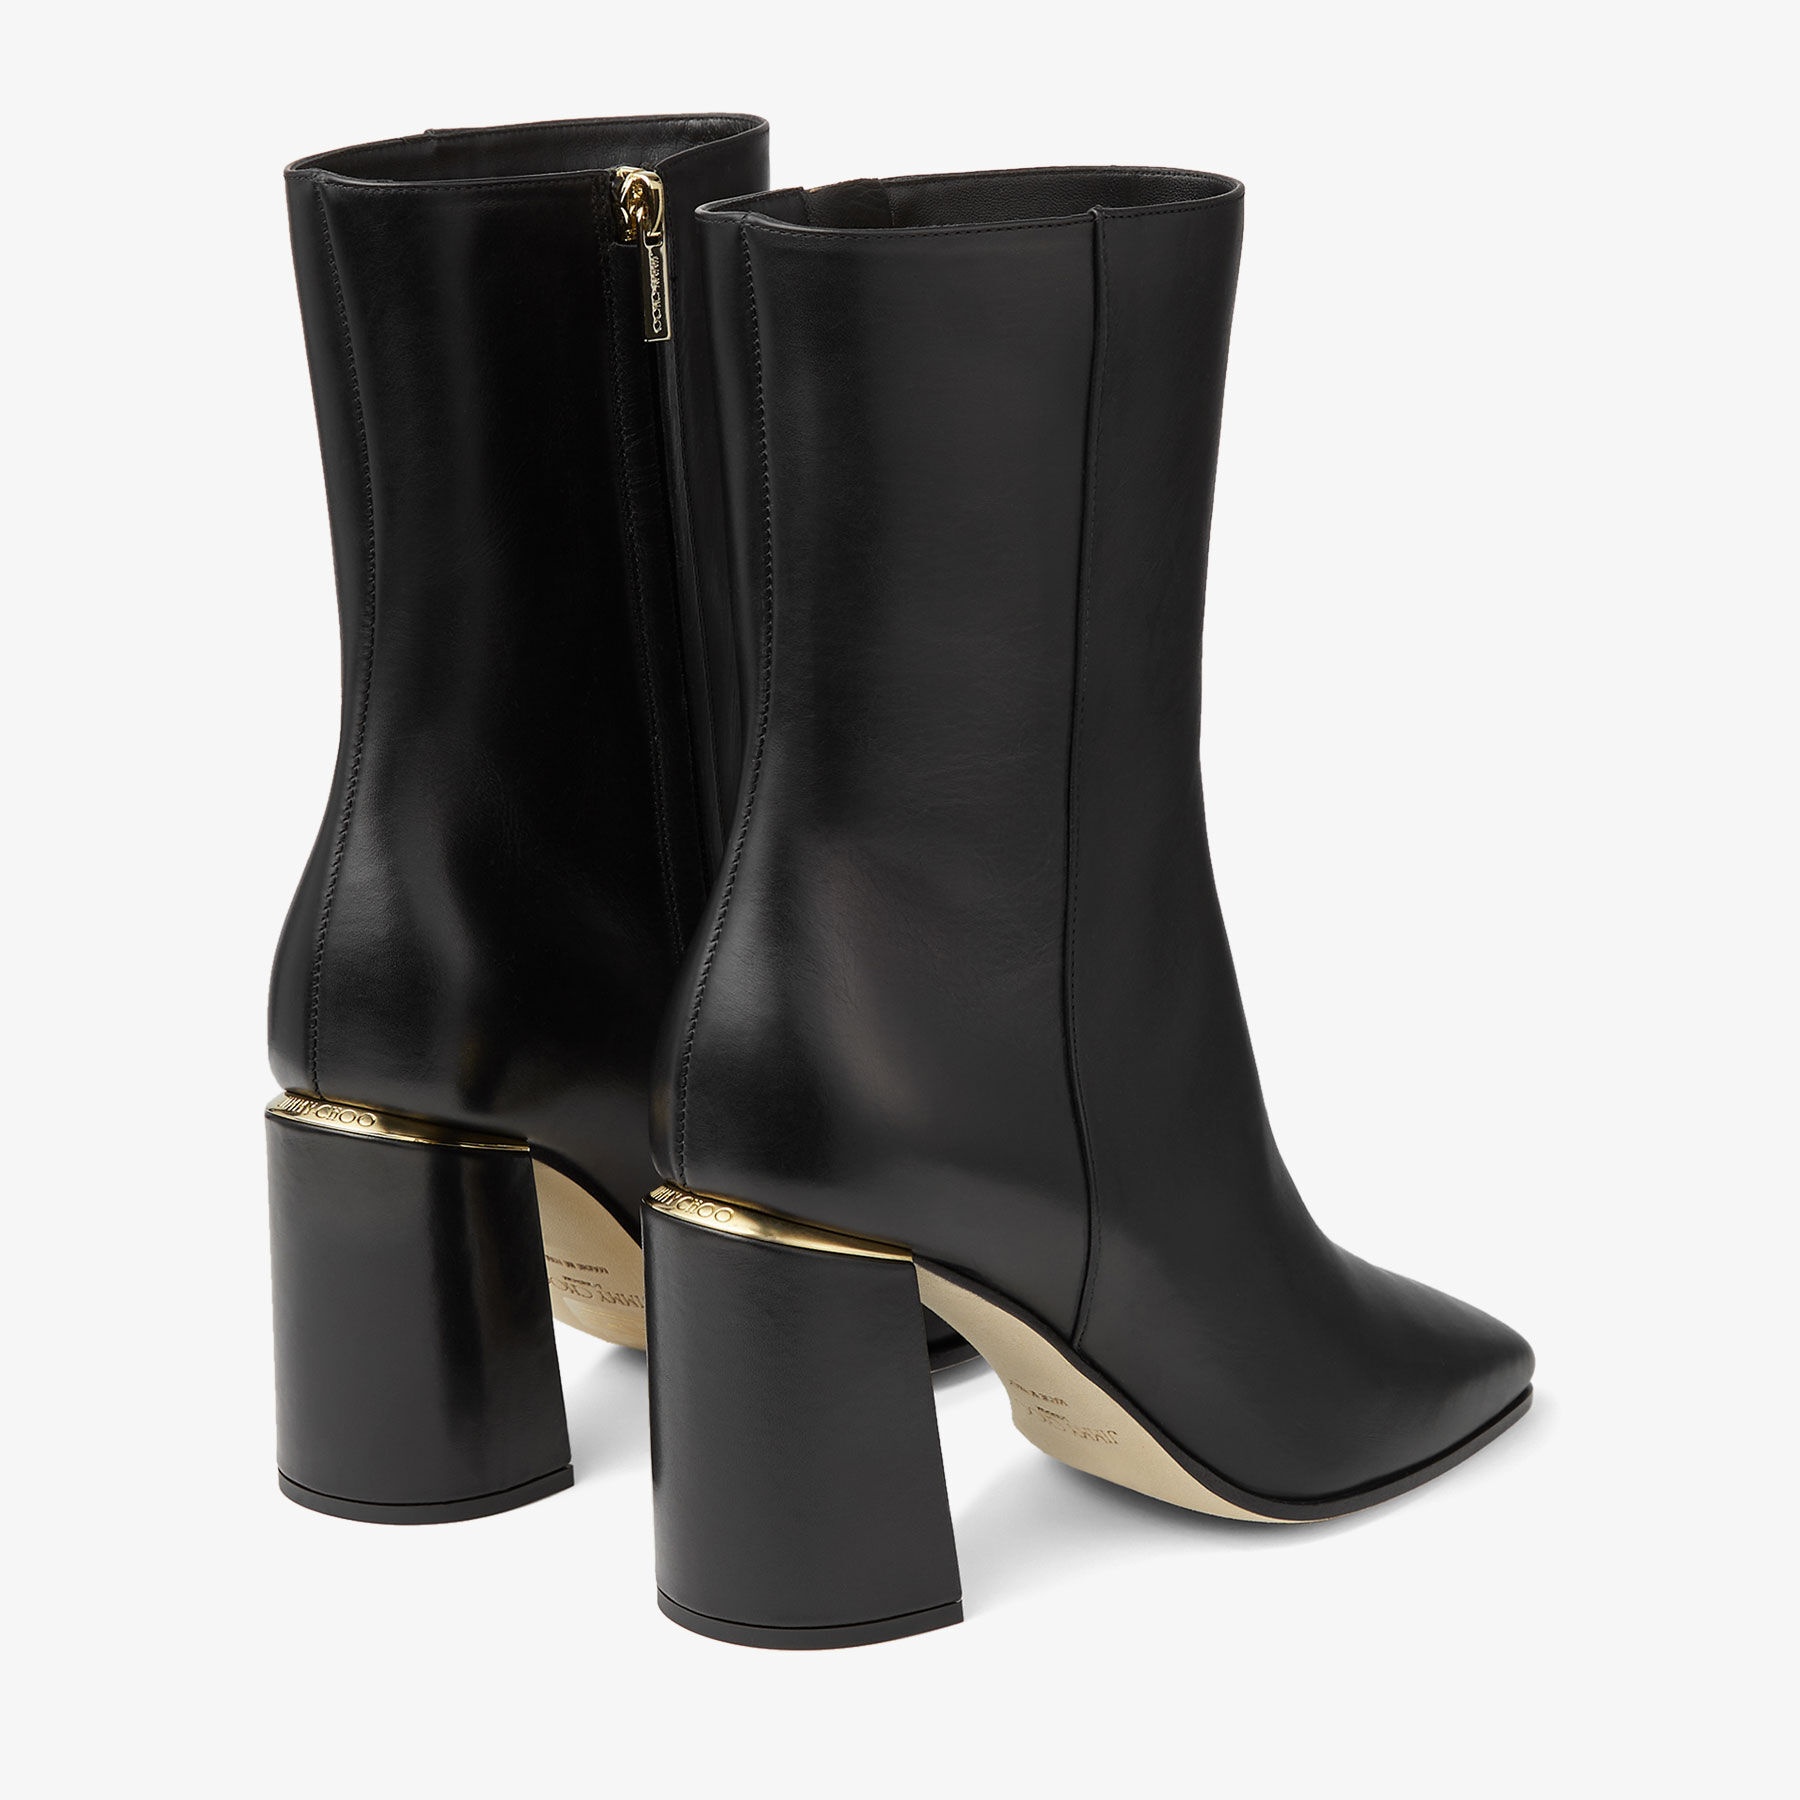 Loren Ankle Boot 85
Black Calf Leather Ankle Boots - 6